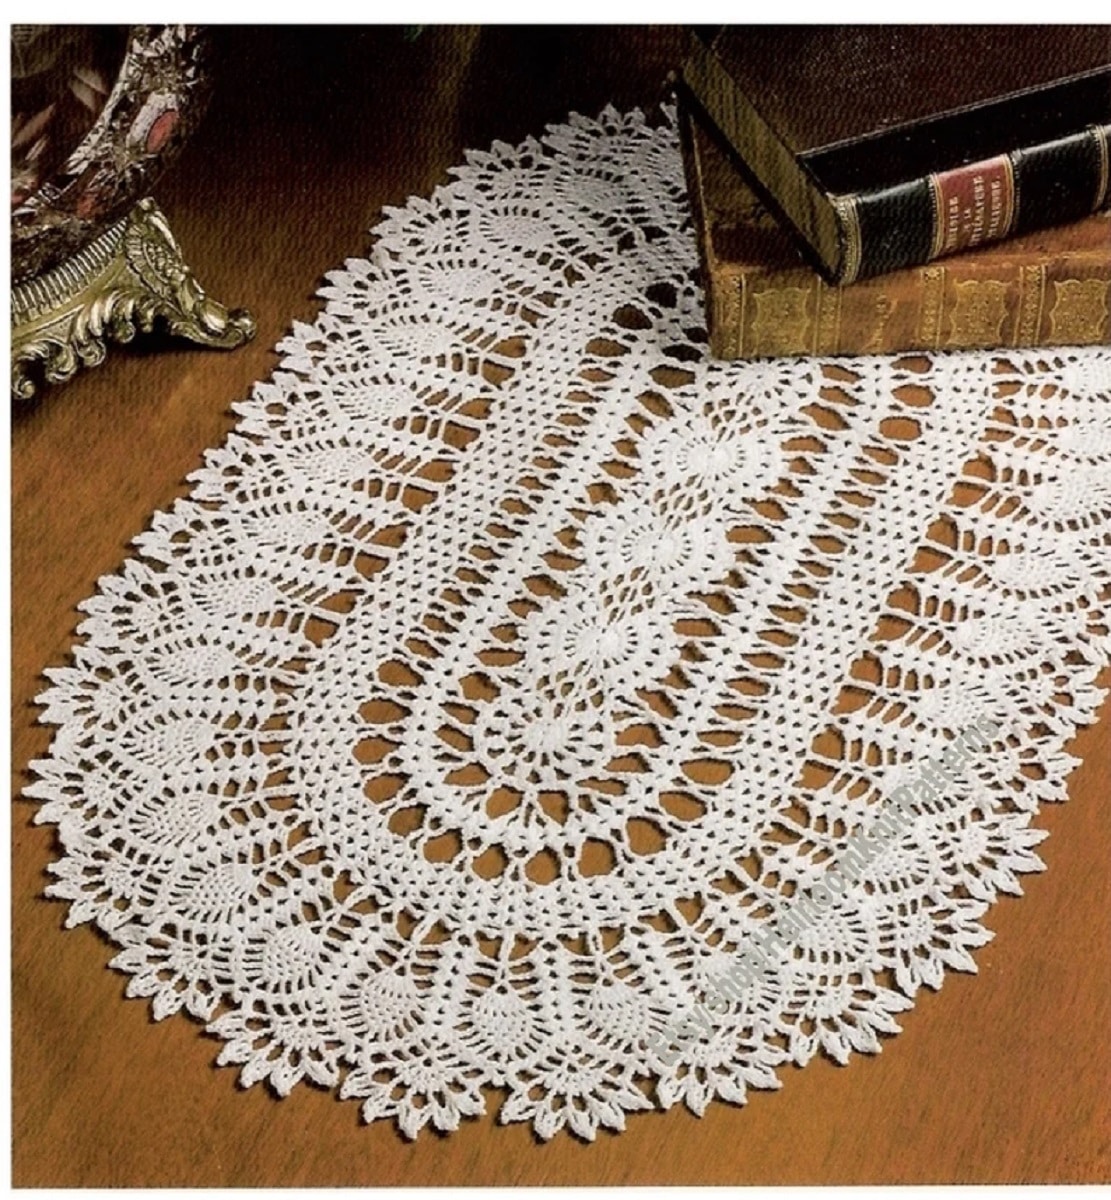 White pineapple doily featuring a slight trim on a wooden table with some leather bound books in the top corner.